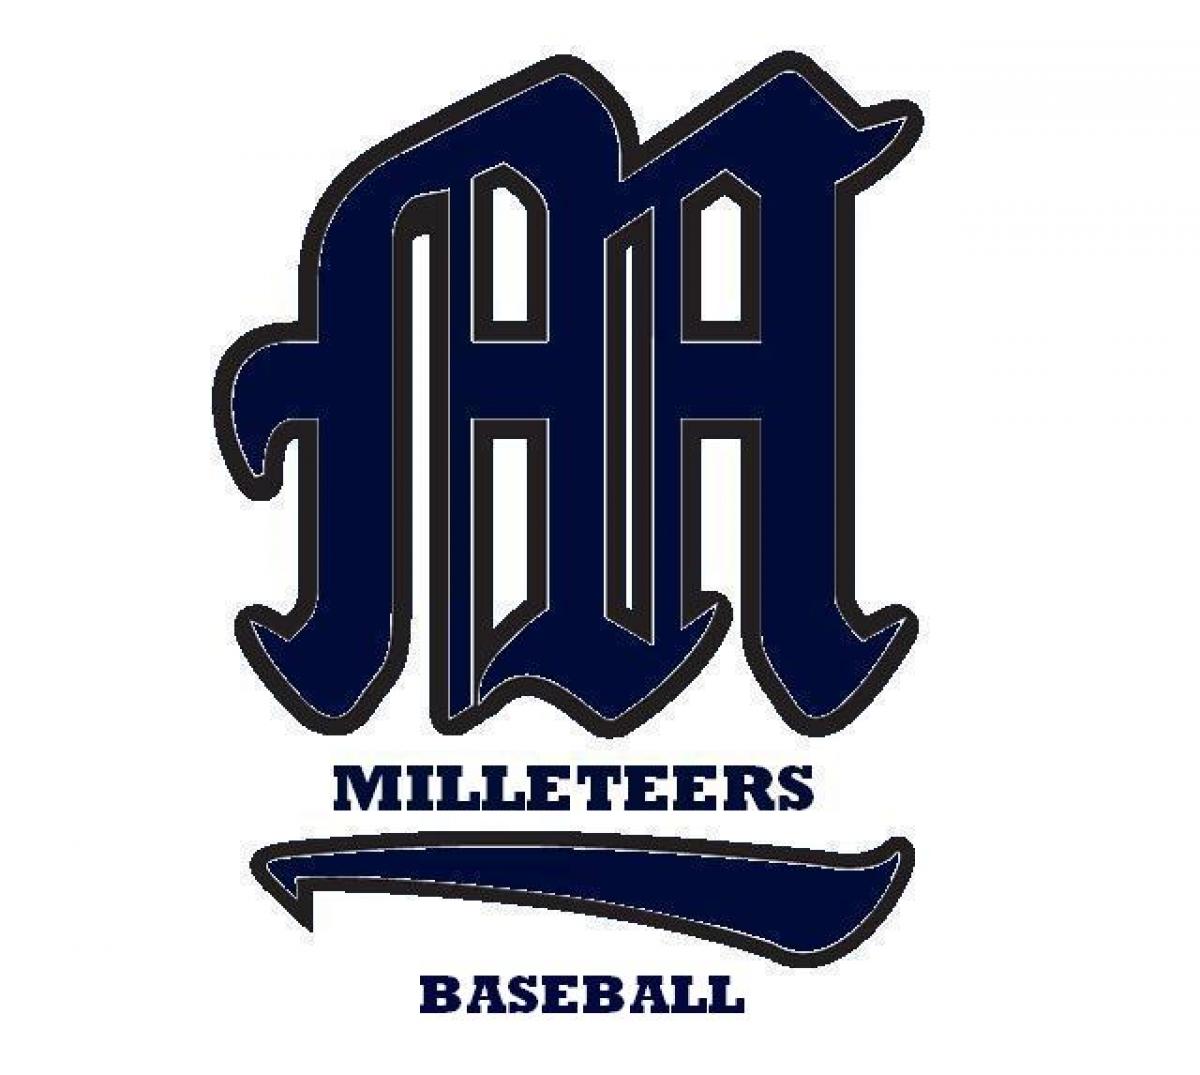 Milleteers Take Game 1 in A Thriller